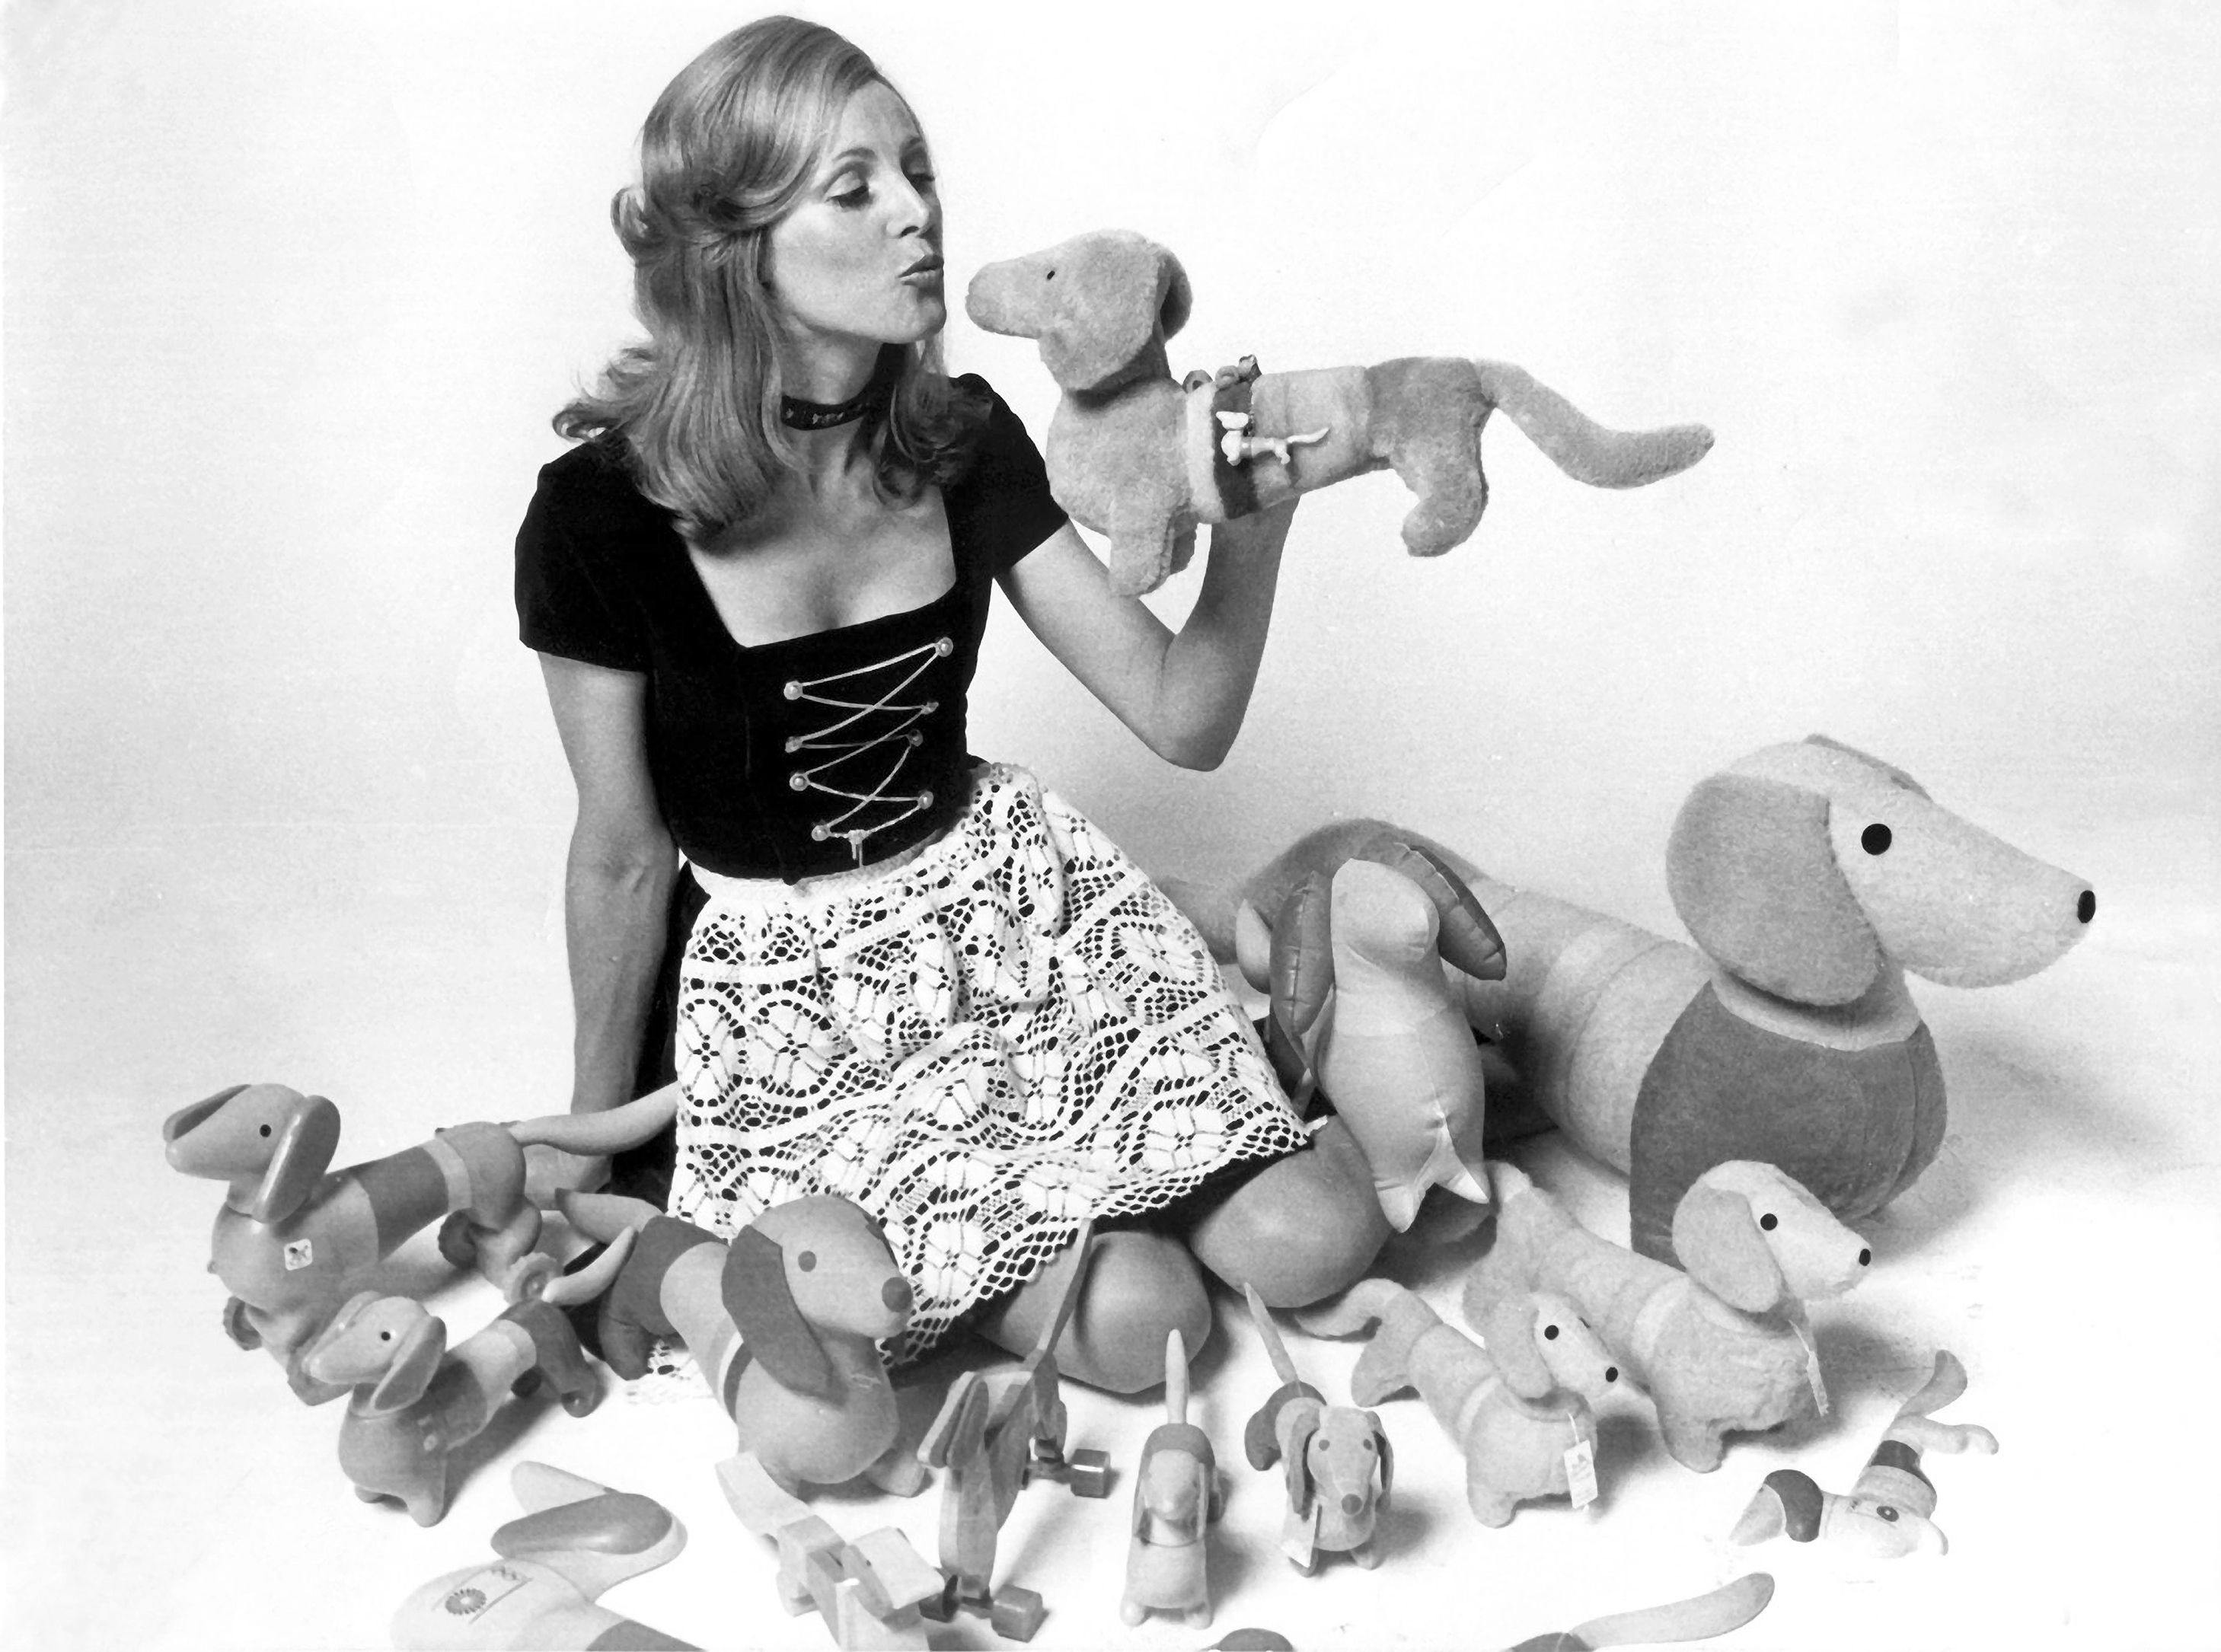 Uschi Badenberg poses with a soft toy collection of the Olympic Games 1972 mascot
Waldi, 1971. Photo Hollandse Hoogte / dpa Olympia 